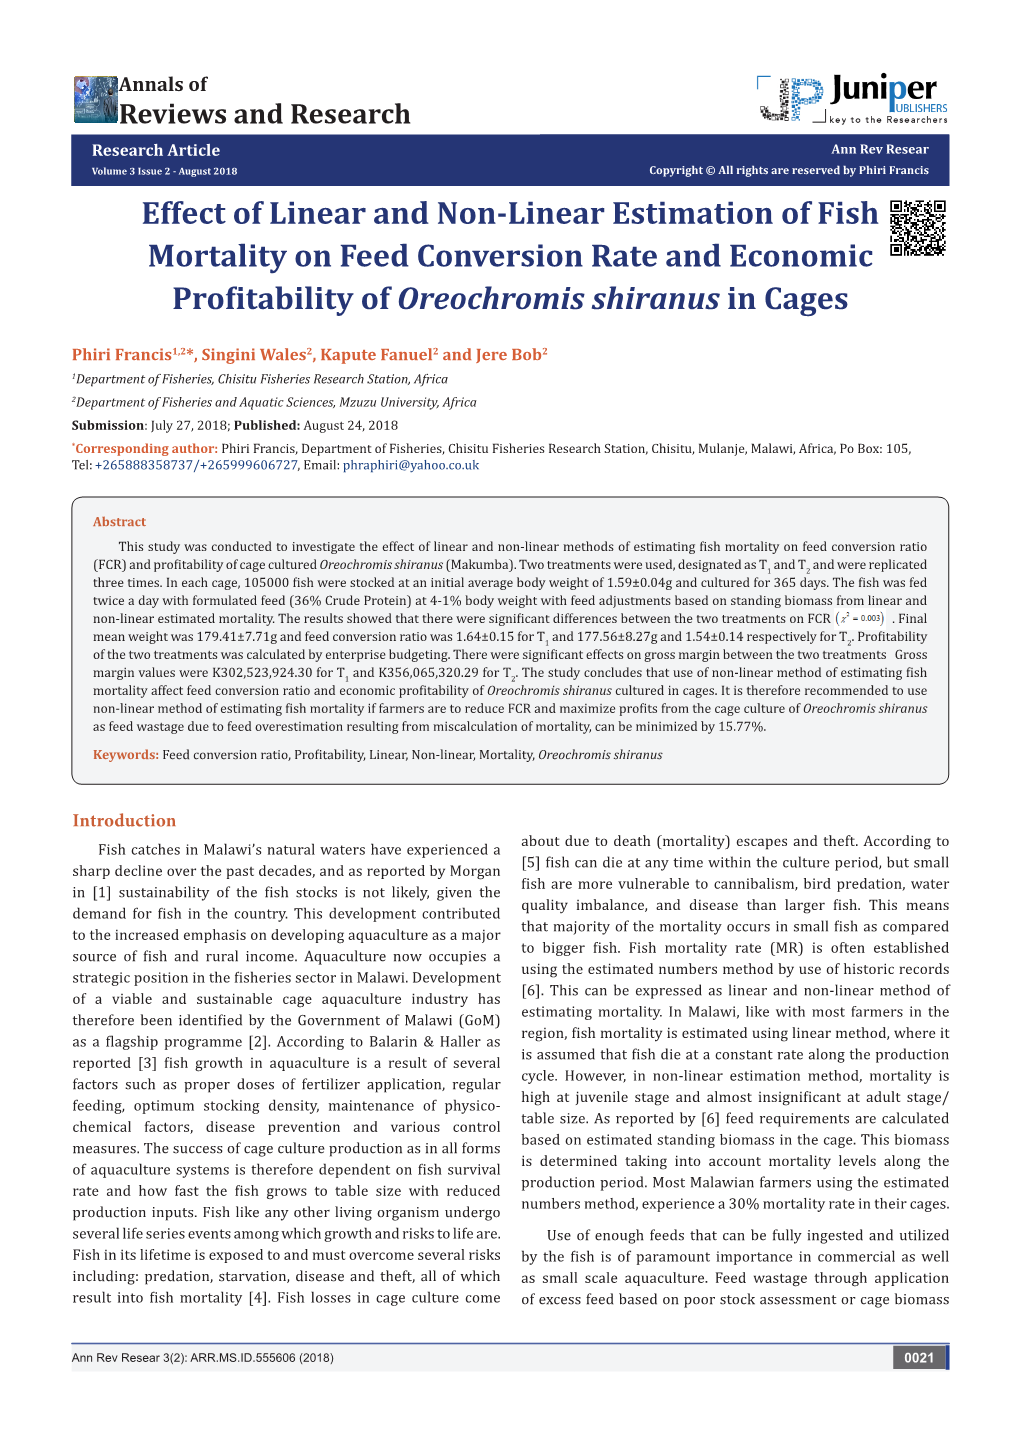 Effect of Linear and Non-Linear Estimation of Fish Mortality on Feed Conversion Rate and Economic Profitability of Oreochromis Shiranus in Cages